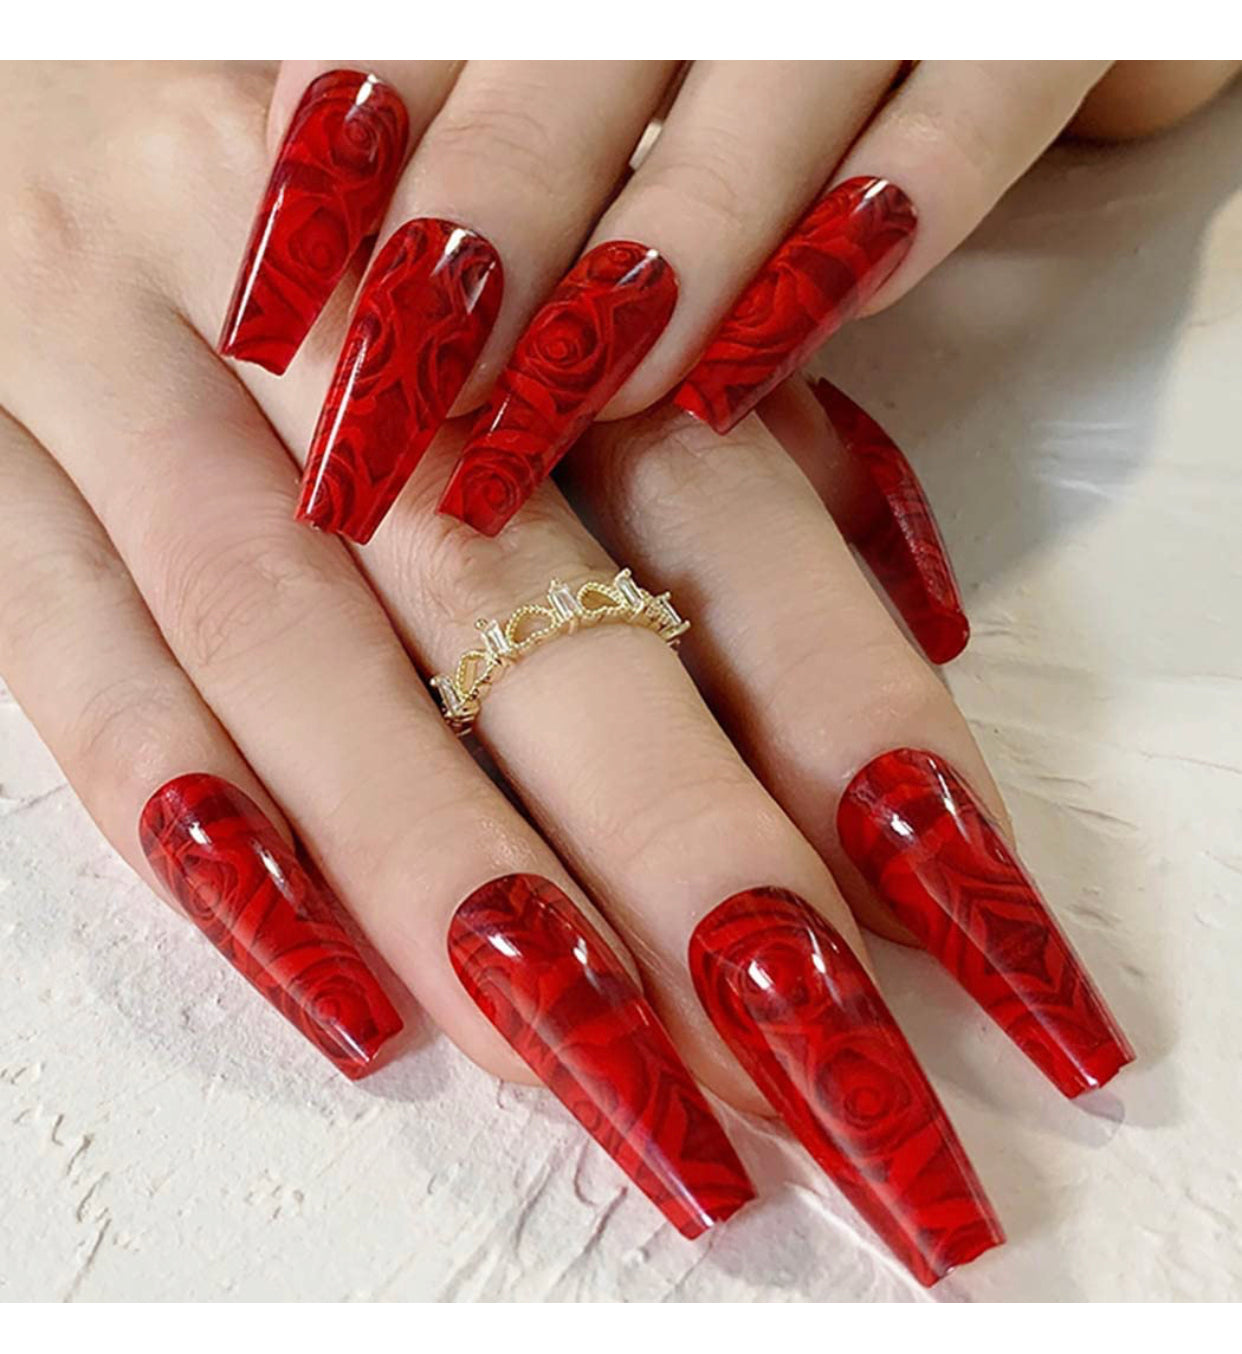 ROMANTIC PRESS ON NAILS COFFIN BALLERINA SHAPE WITH BEAUTIFUL RED ROSES